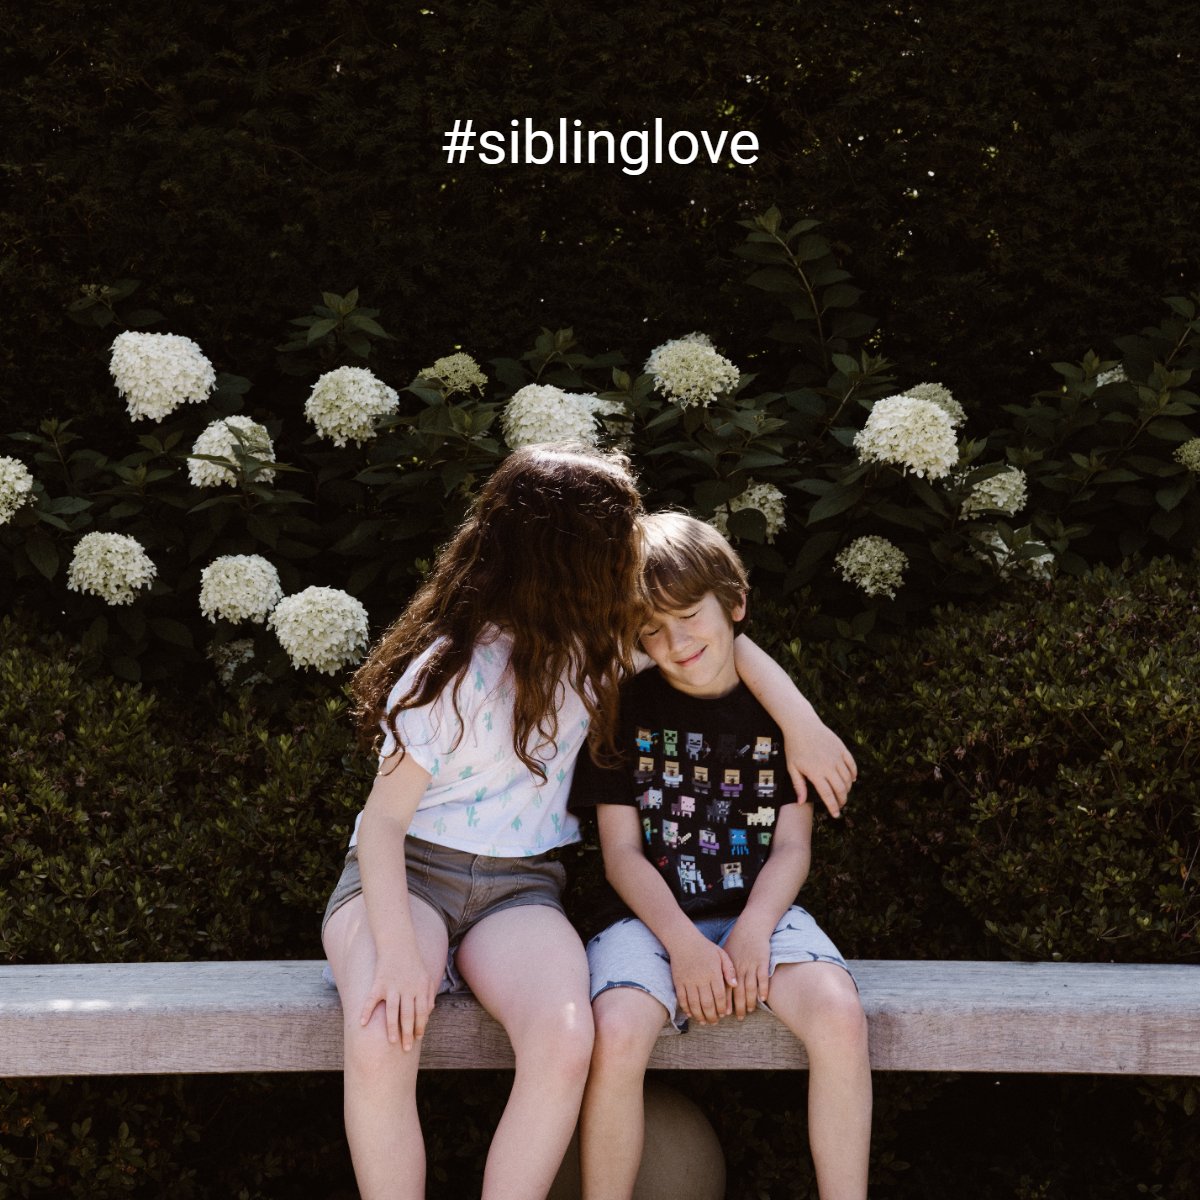 'Nothing beats that sibling love.' 👭❤️👬
― Will Smith 

#quoteoftheday✏️      #quotestagram      #siblings
#Realestate #fairlawn #paramus #saddlebrook #njrealestate #bergencounty #forsalebuyowner #propertymanagement #homeseller #appraisel #elmwoodpark